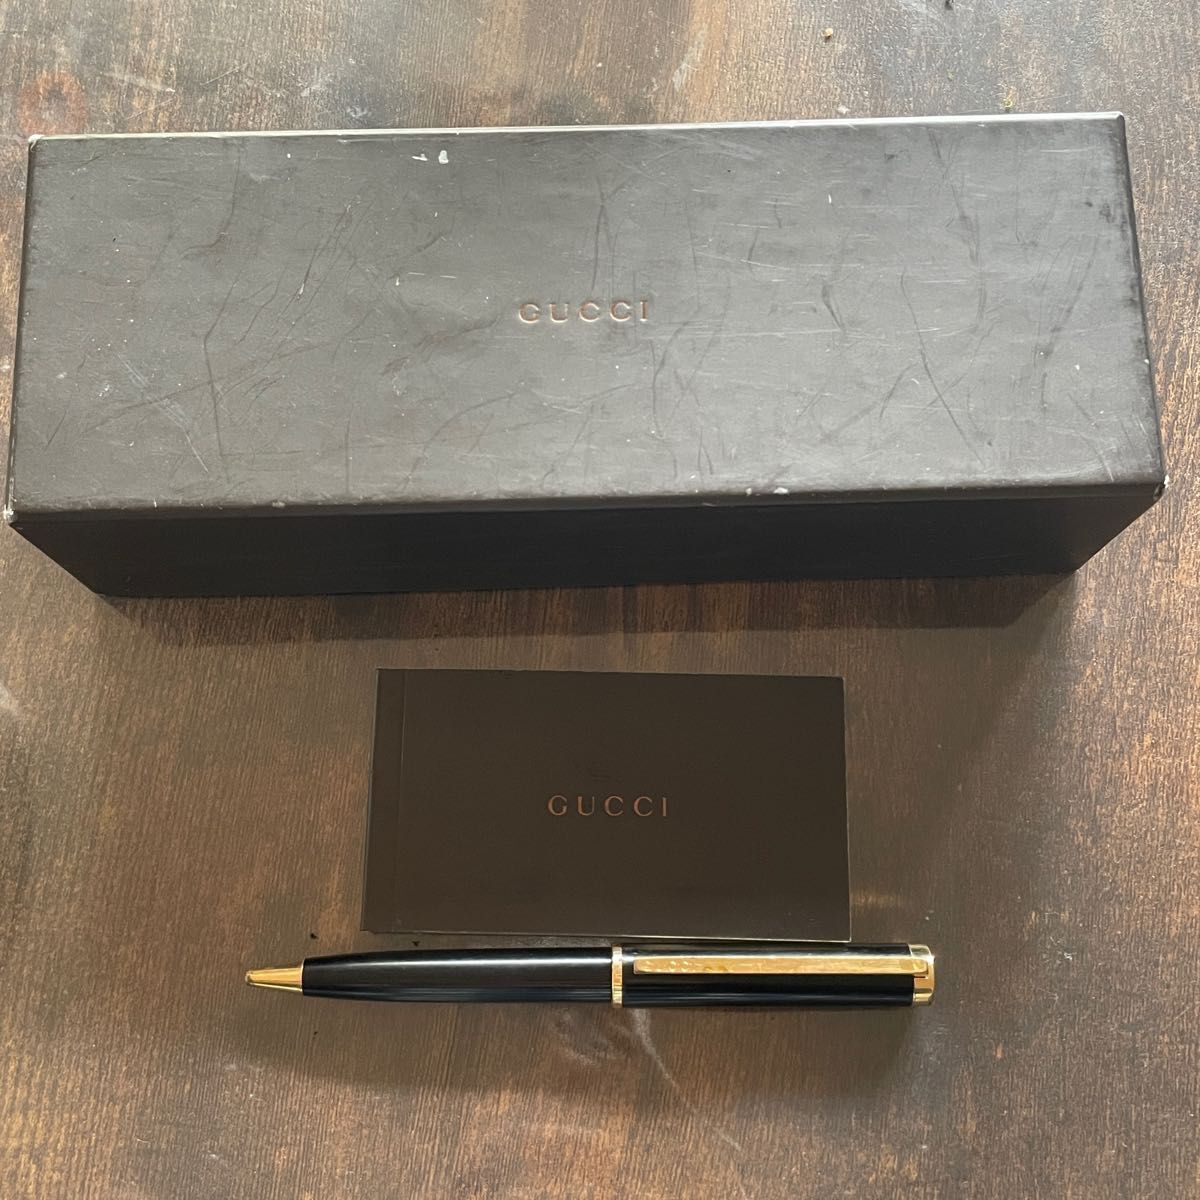 GUCCI Ballpoint Pen Black Gold Box and Instruction Manual Included Luxury Brand